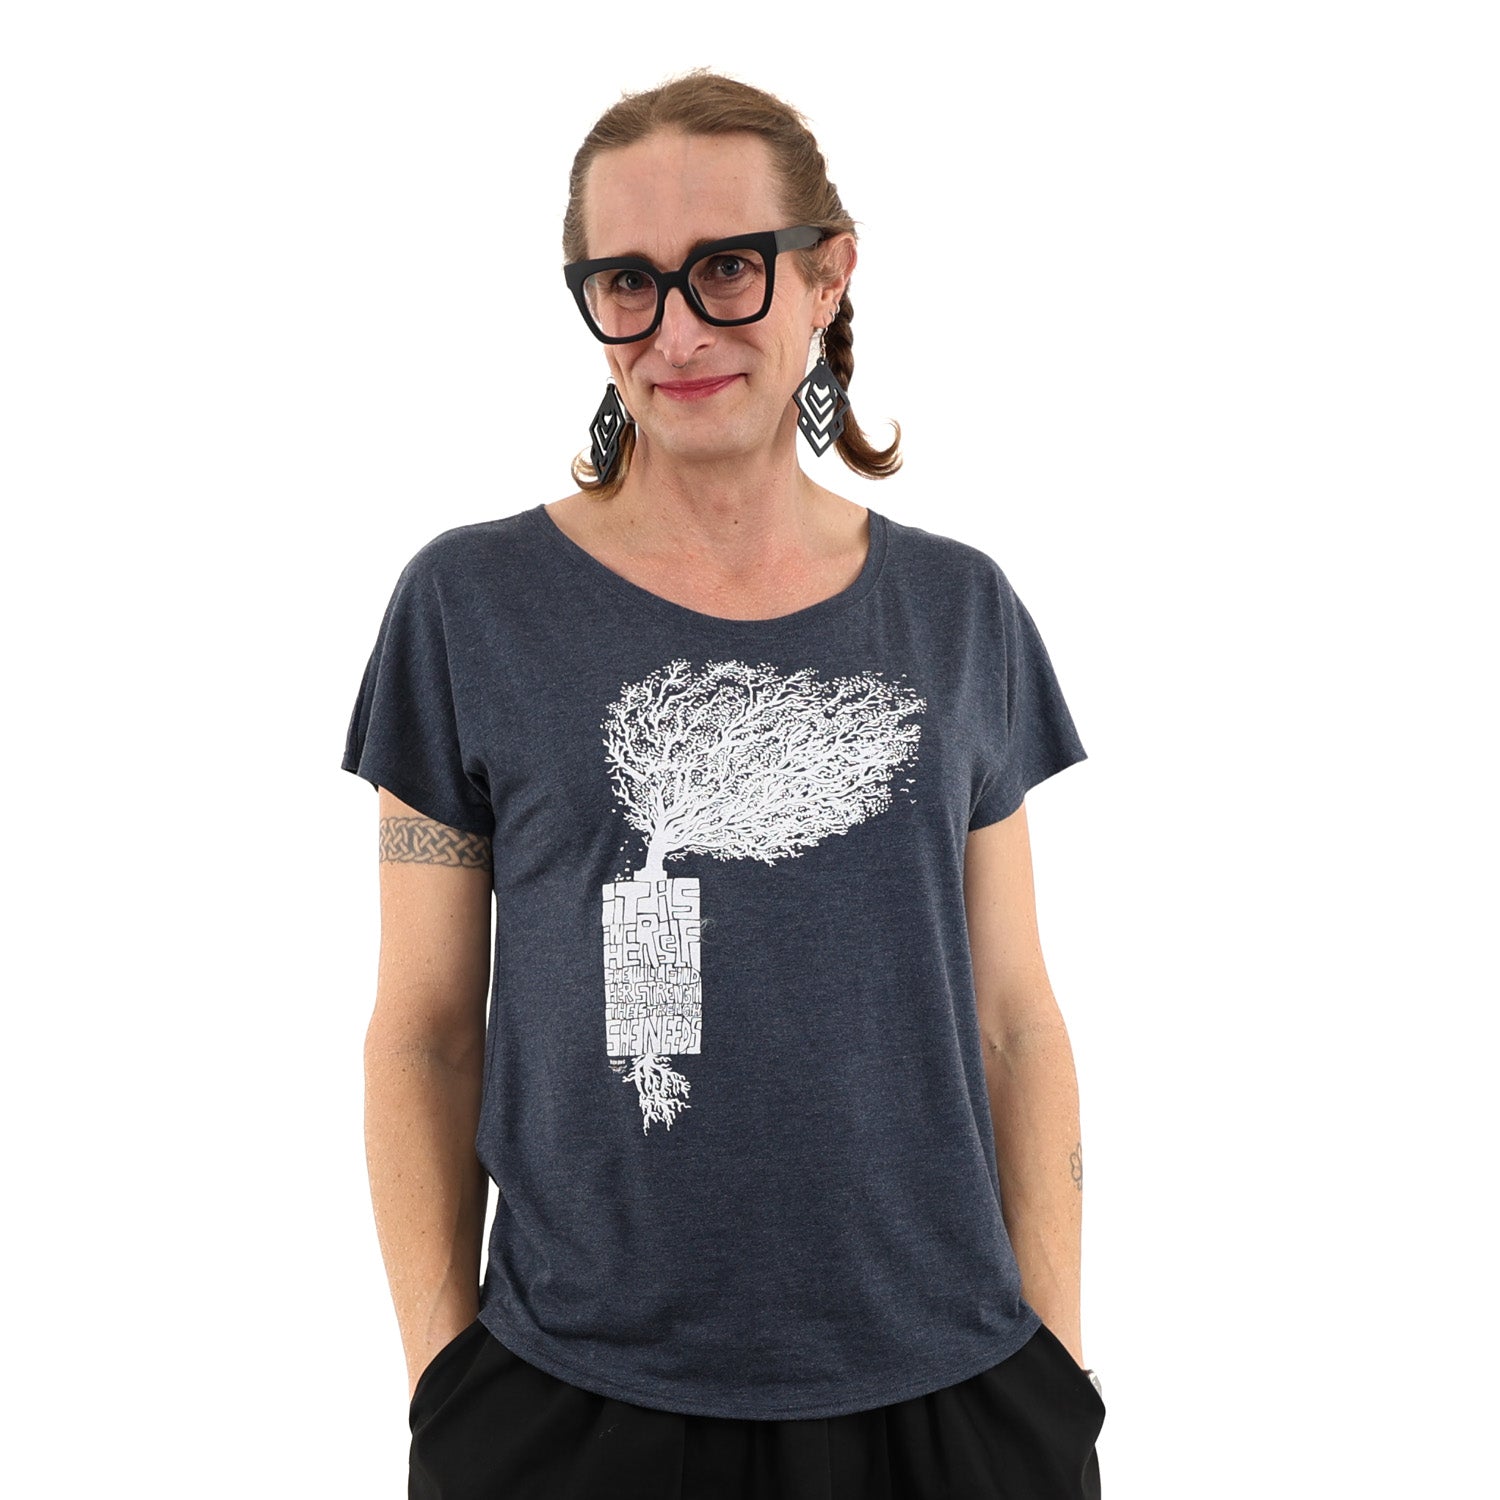  Woman wearing loose fitted blue t shirt with white print